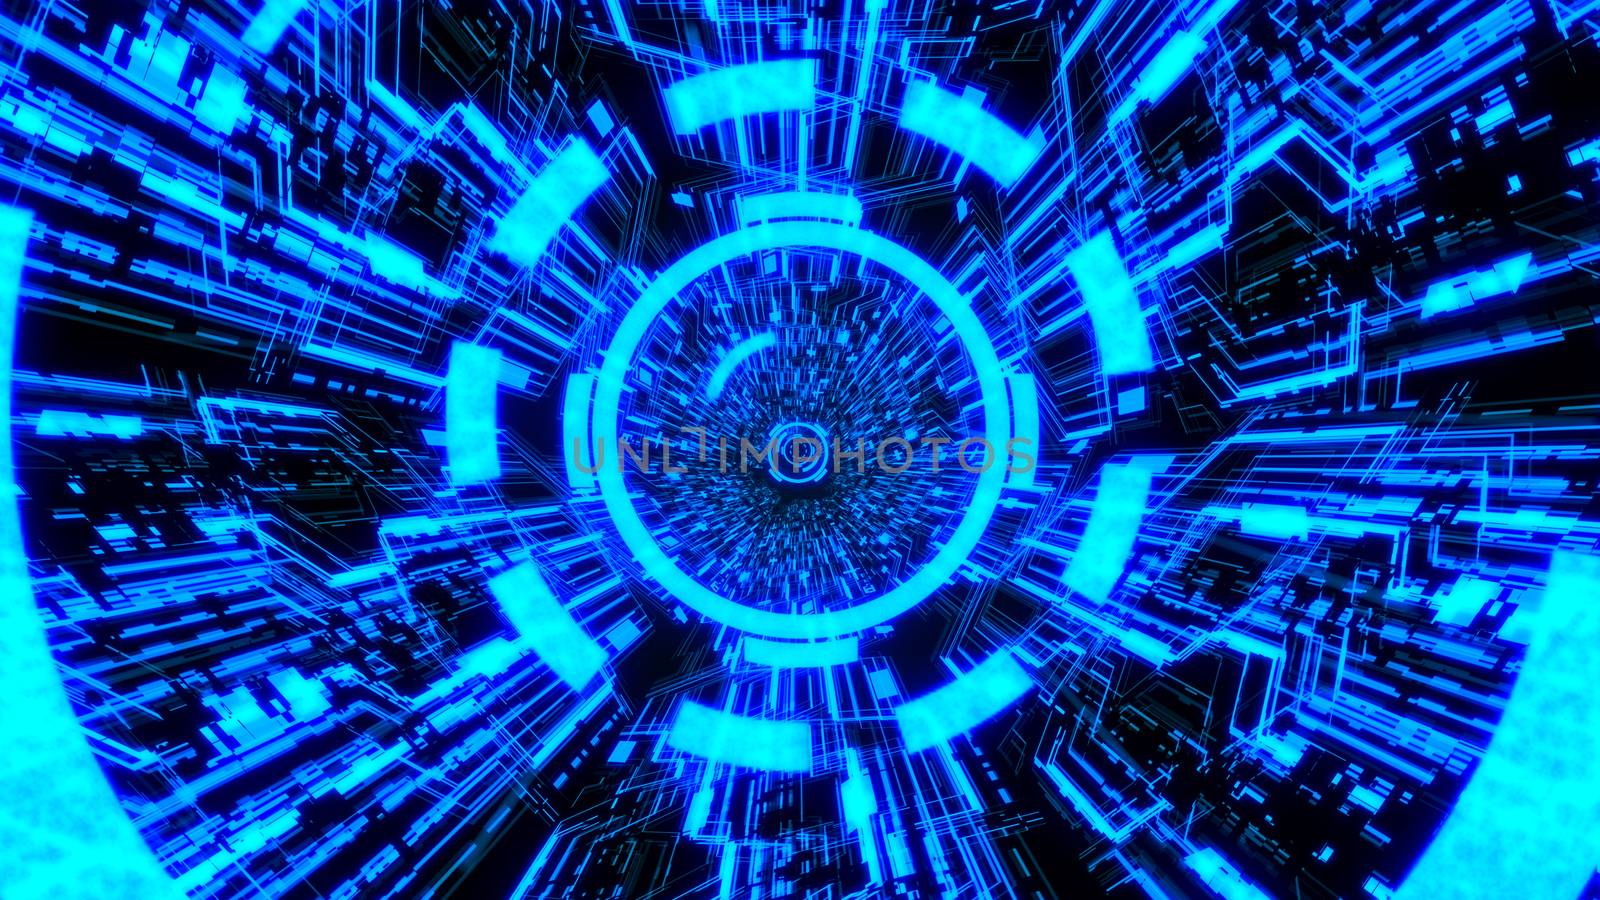 3D Digital Circuit System Tunnels and Waves with Digital Circles in the middle in Blue color theme Background Ver.4